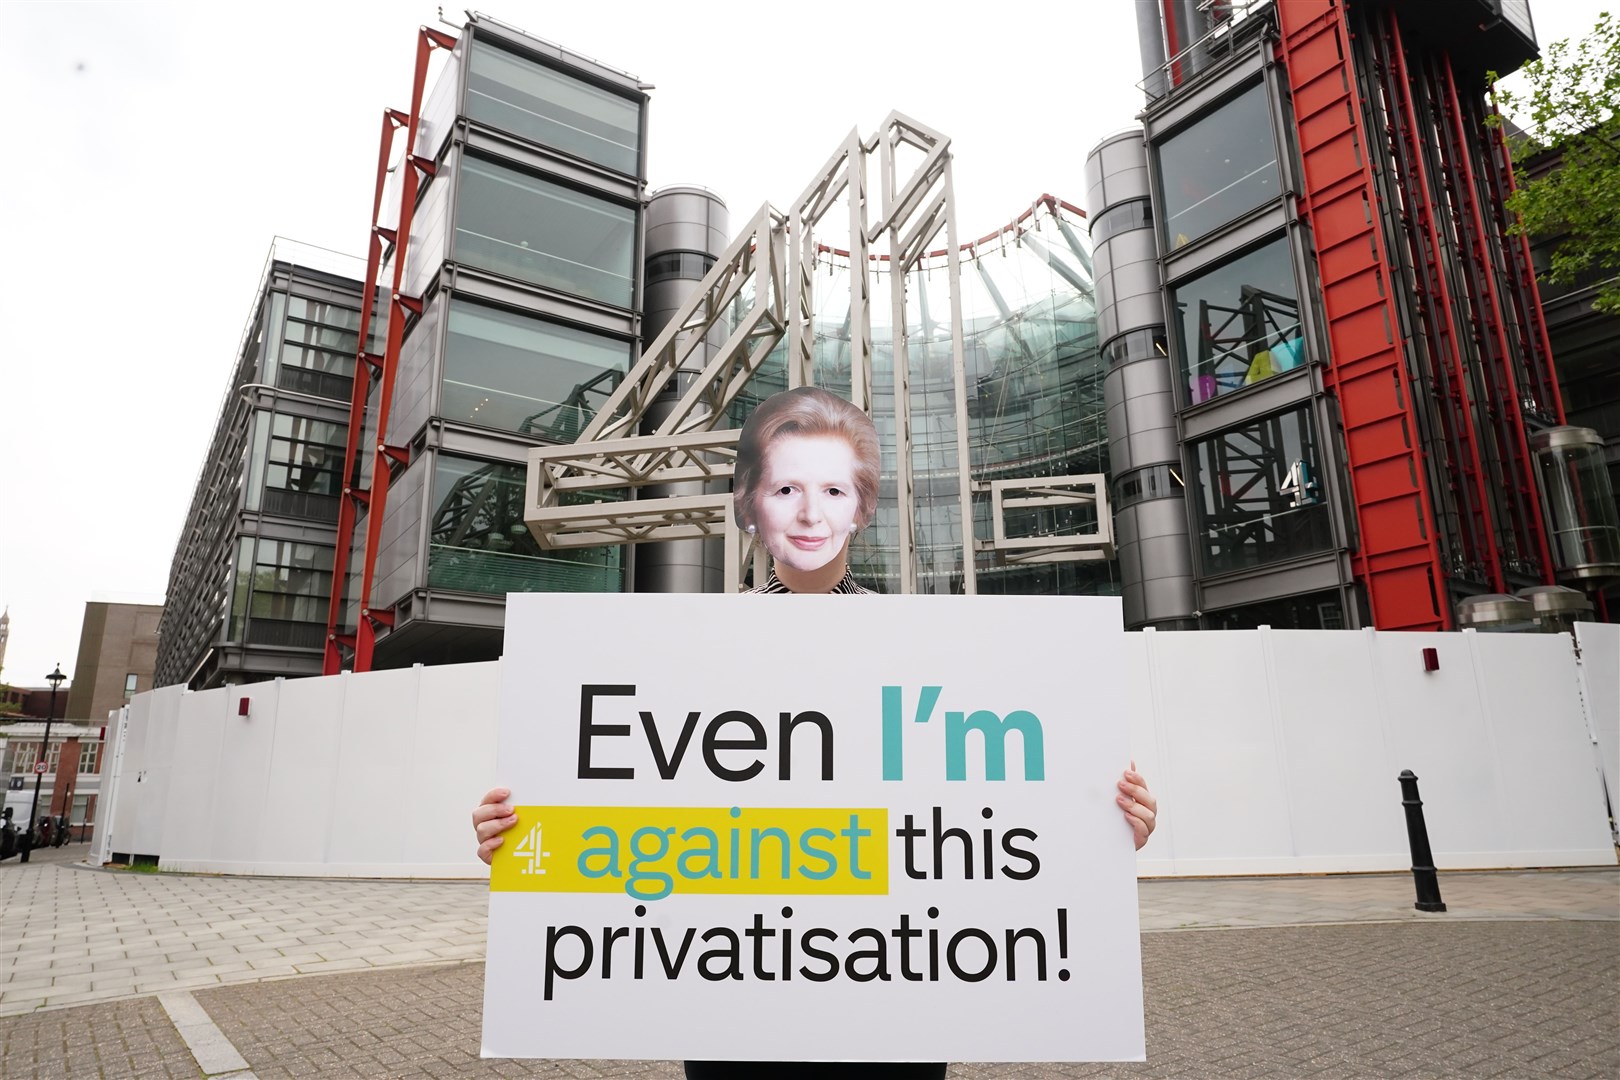 A protester wearing a mask of former prime minister Margaret Thatcher outside the Channel 4 London headquarters (Ian West/PA)